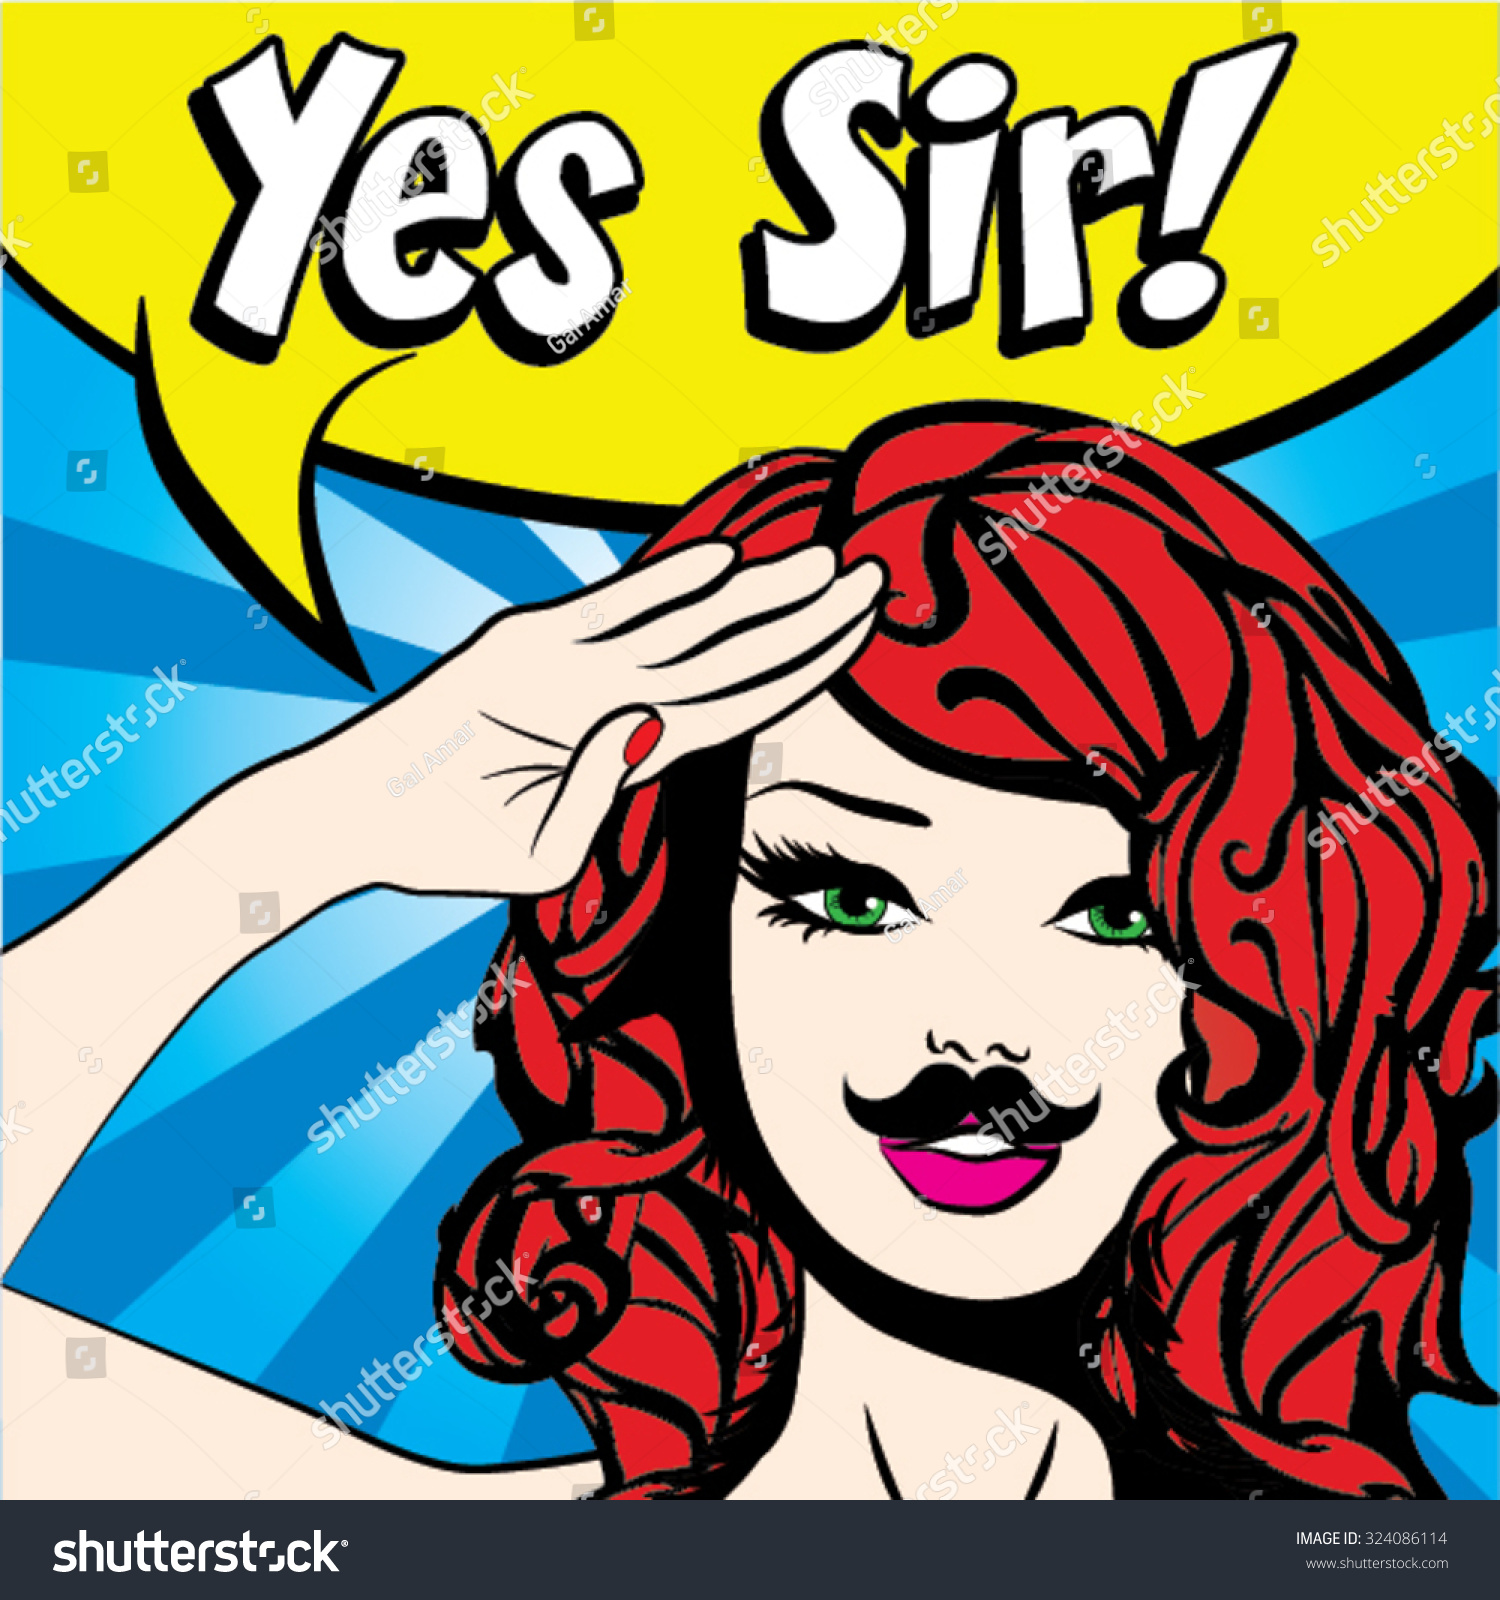 yes sir clipart - photo #9